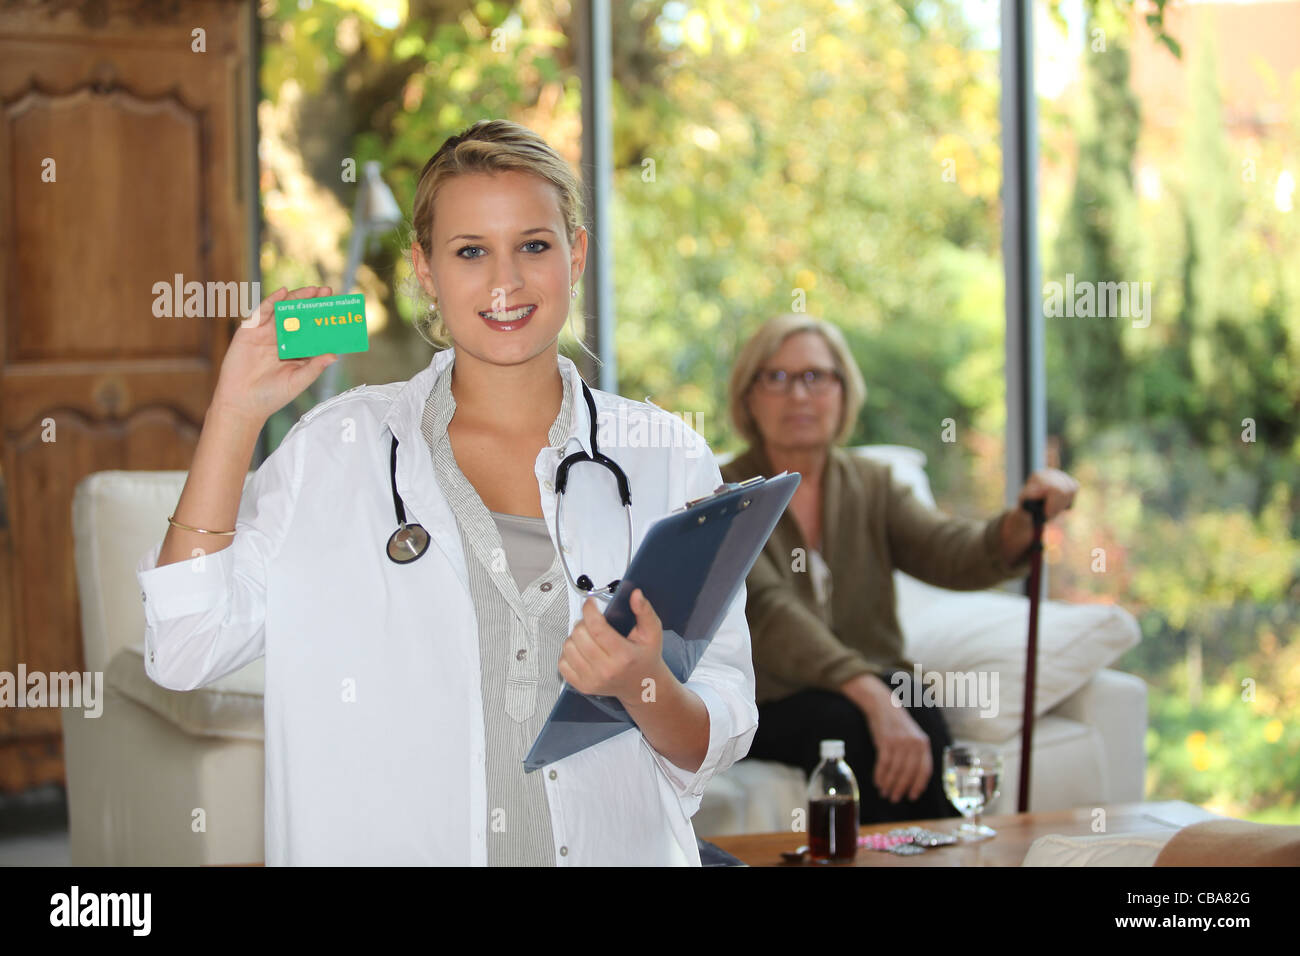 A Nurse Visiting An Elderly Patient At Home Stock Photo Alamy